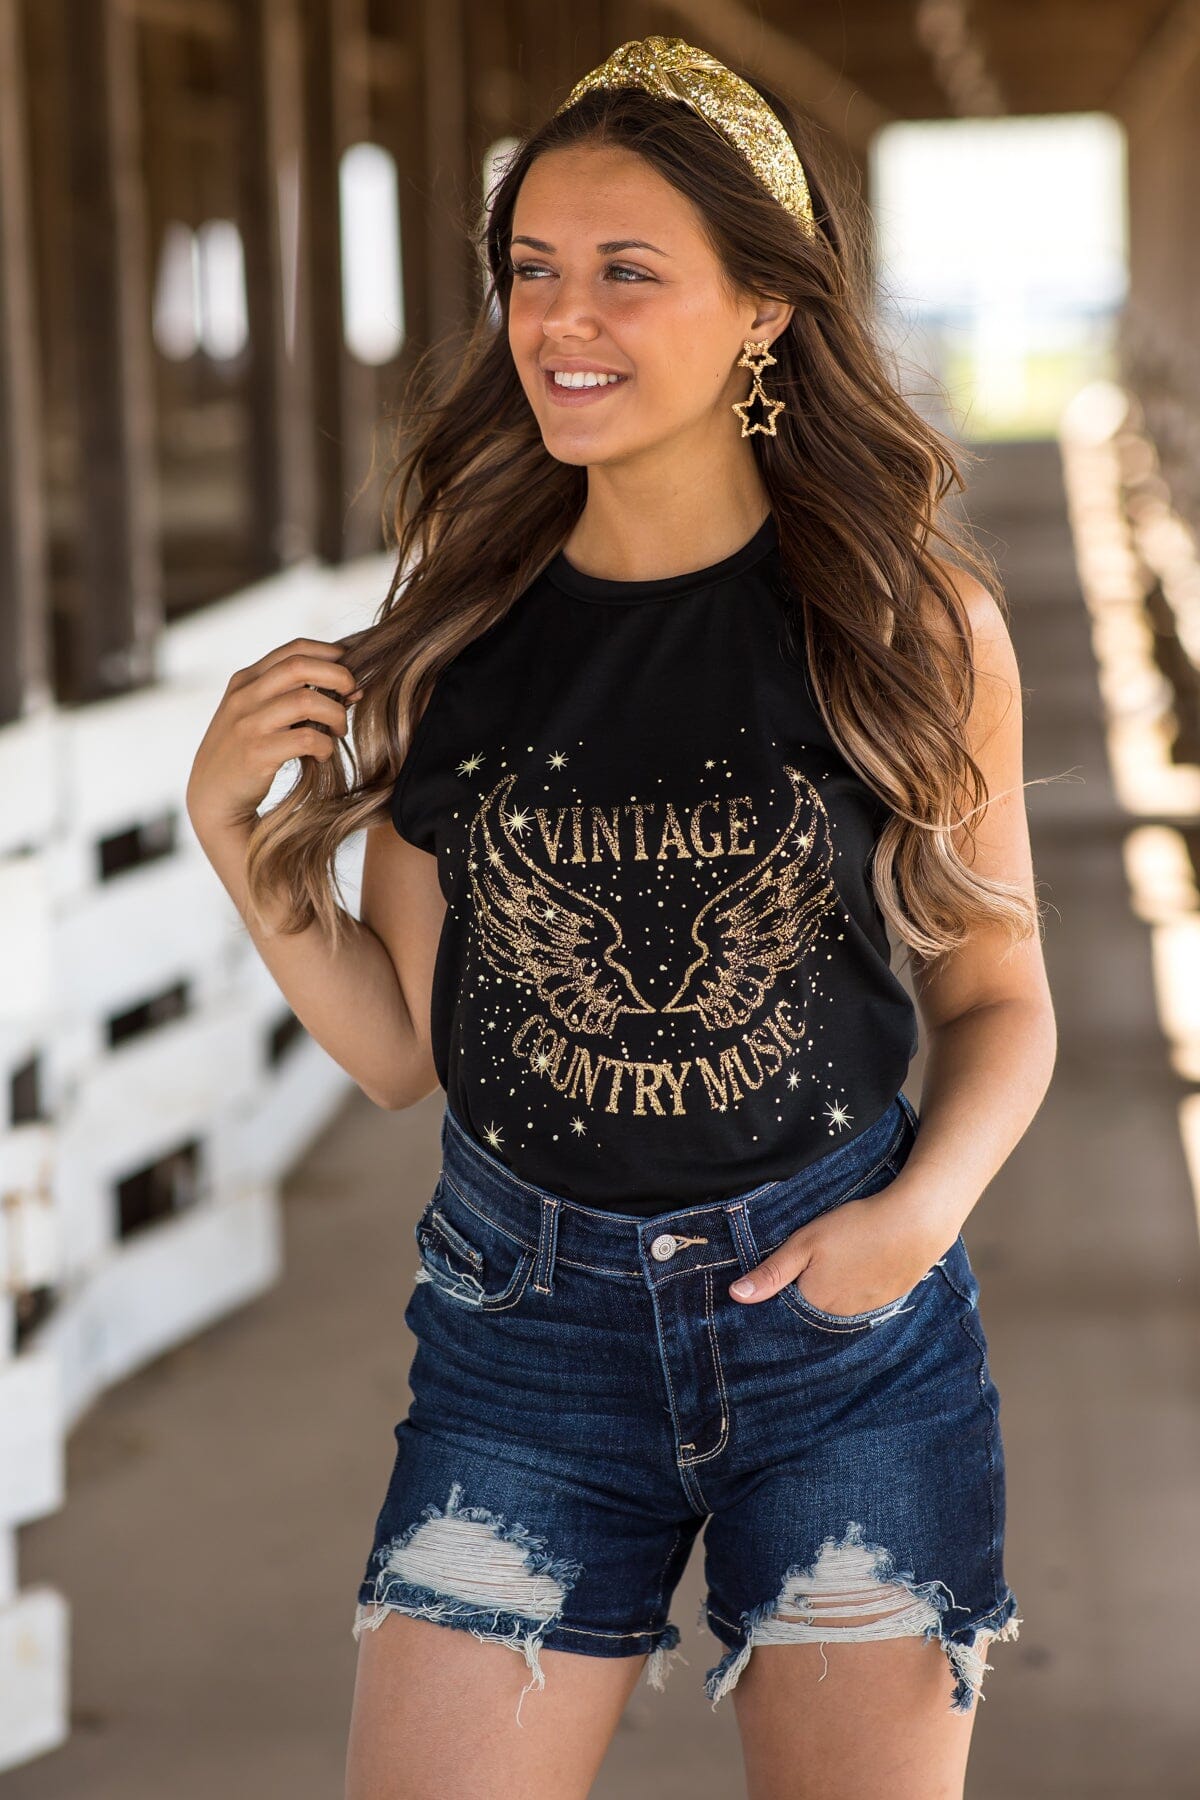 Black Vintage Country Music Graphic Tank - Filly Flair